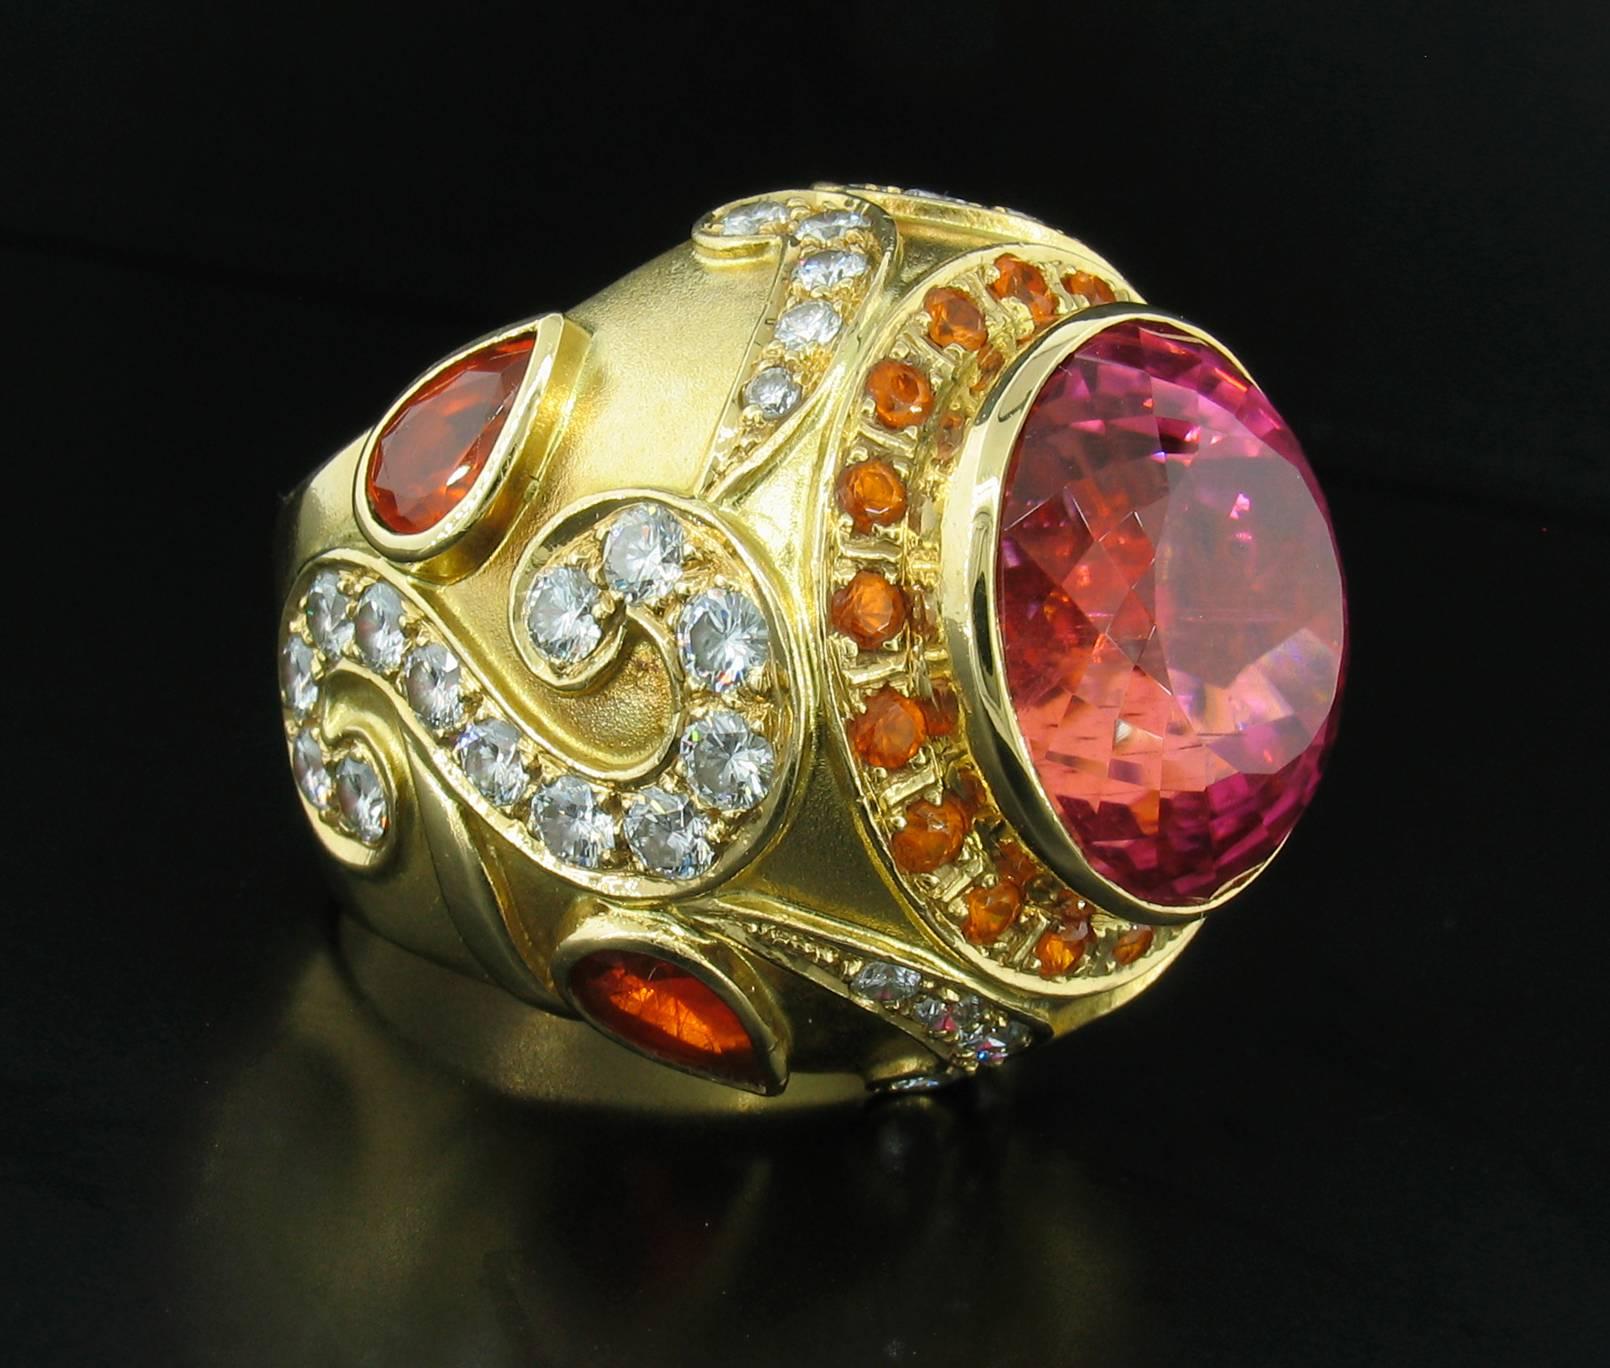 California Tourmaline, Garnet and Diamond Ring; This ring was designed and made by well known designer Paula Crevoshay.  It features an incredible, rare California Pink Tourmaline weighing 25.61 carats, Garnets weighting 3.60carats and Diamonds